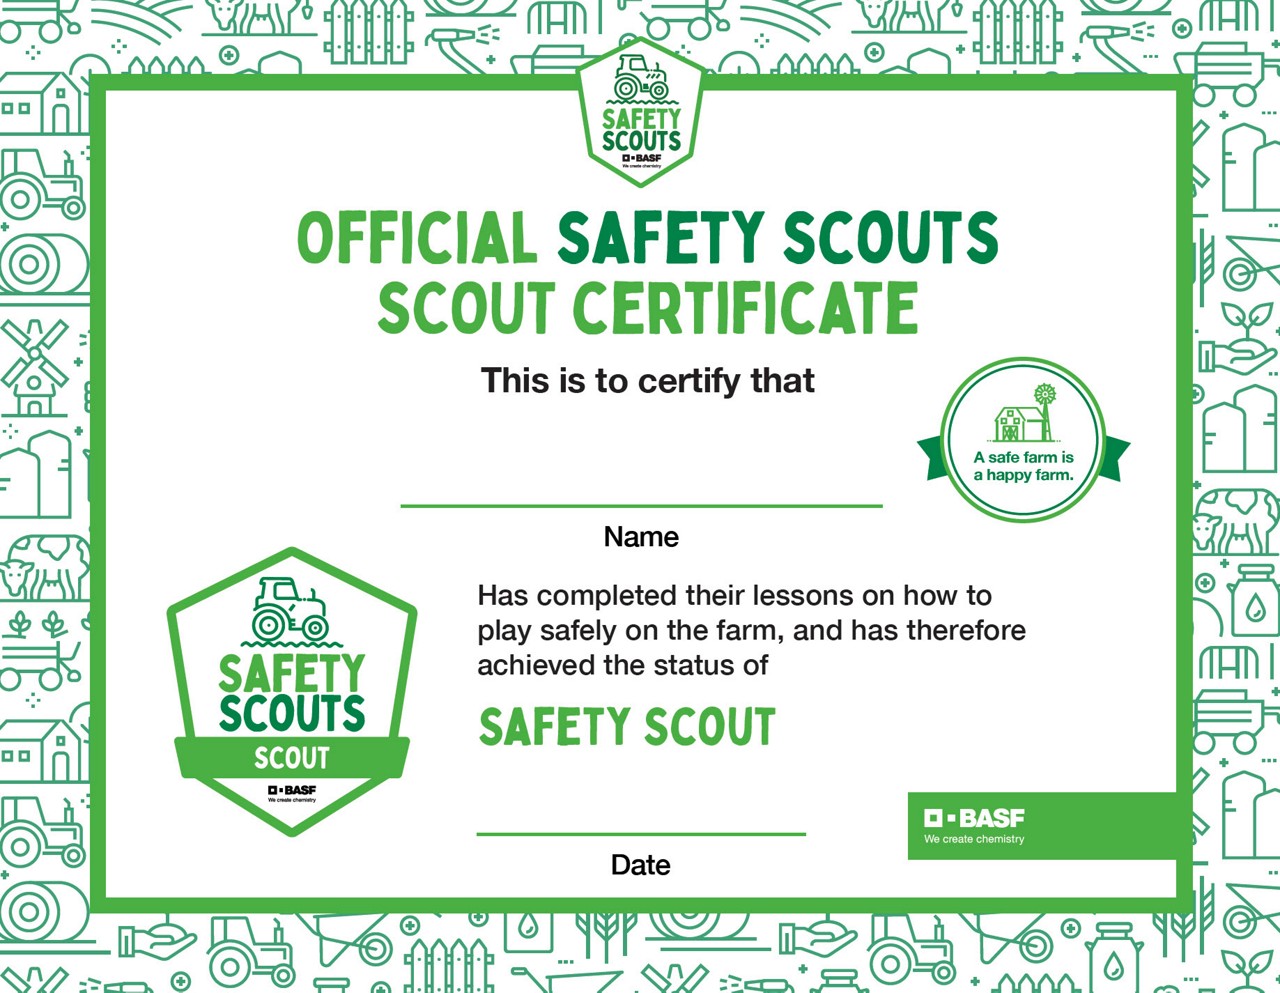 Safety scouts certificate